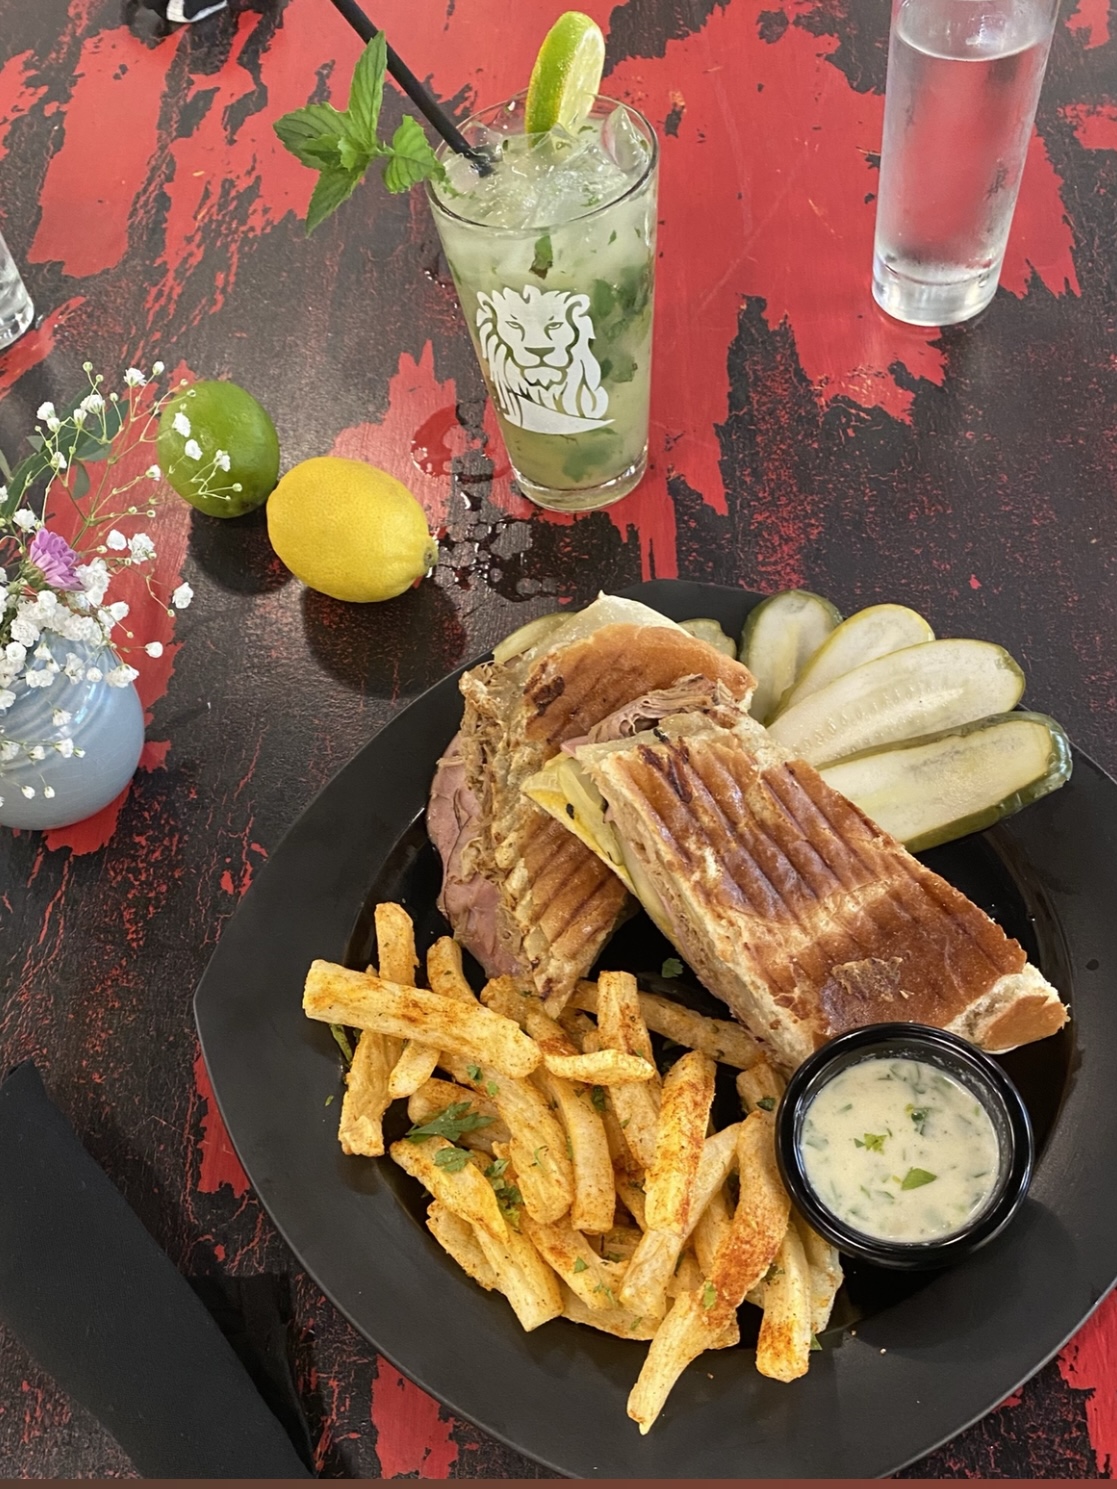 A Cuban sandwich and yuca fries sit on a plate